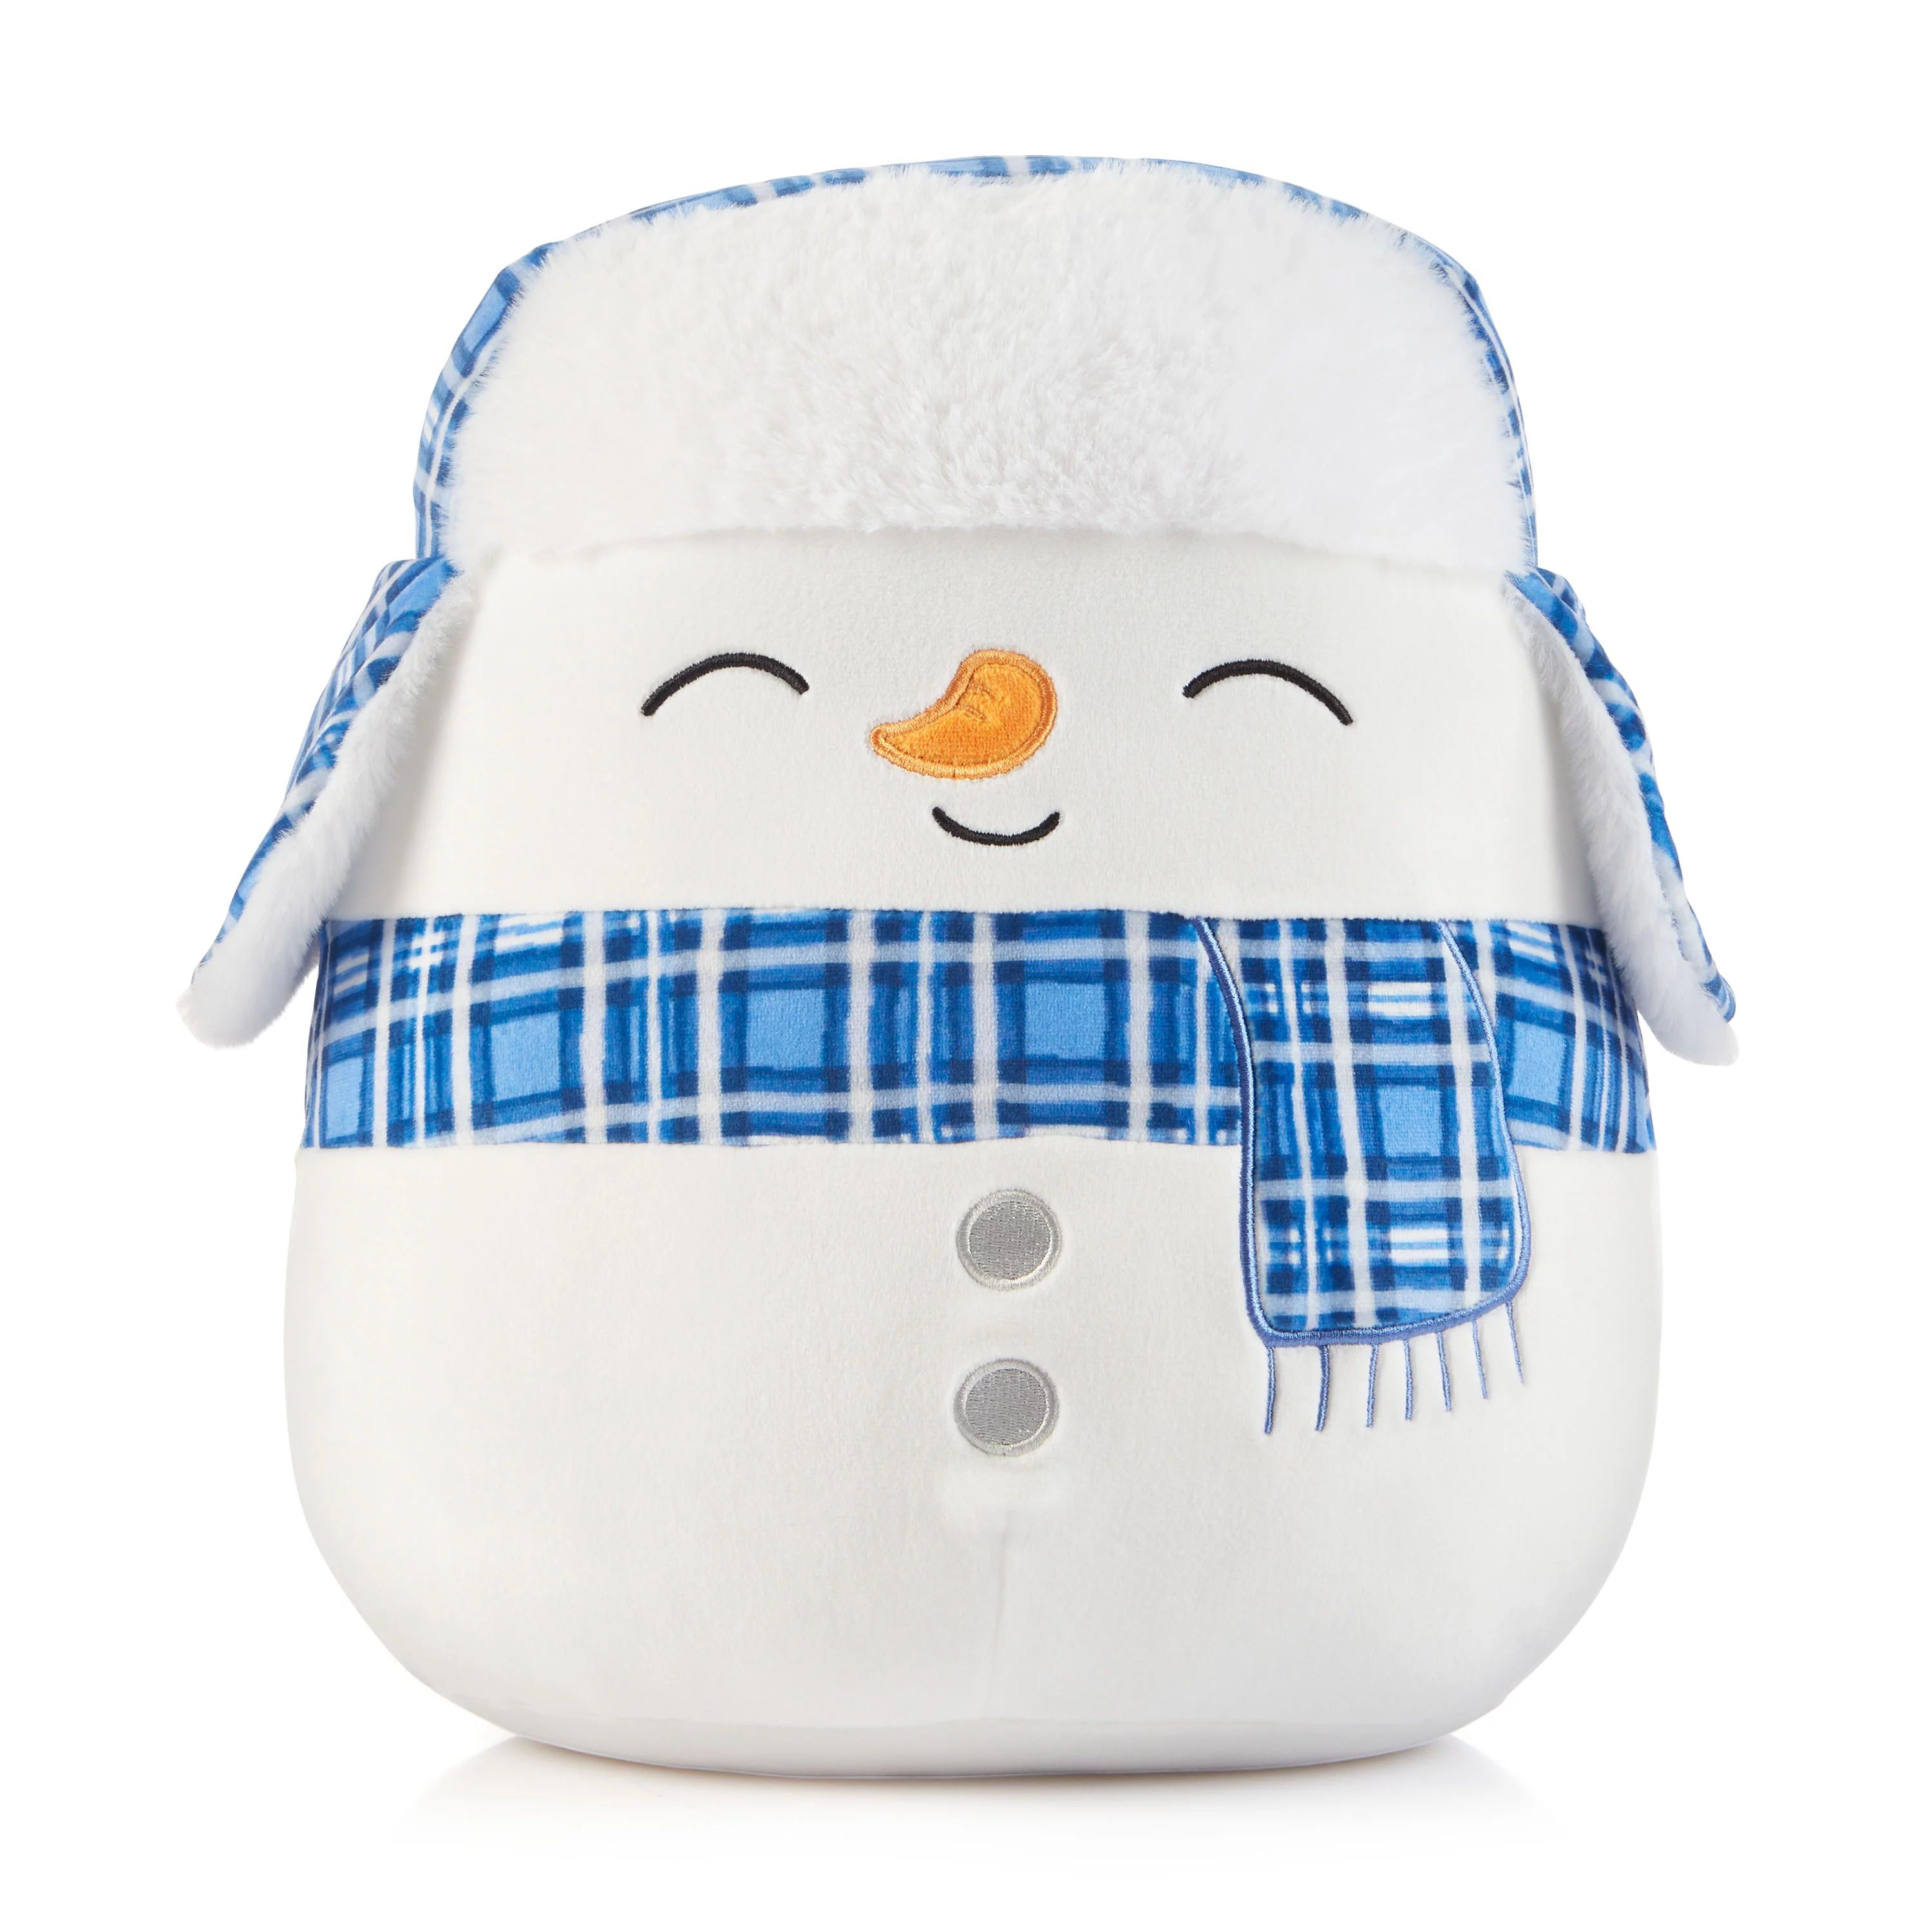 Squishmallows Plush 12" Manny The Snowman - Add This Ultrasoft Holiday Plush Toy To Your Squad To... | Walmart (US)